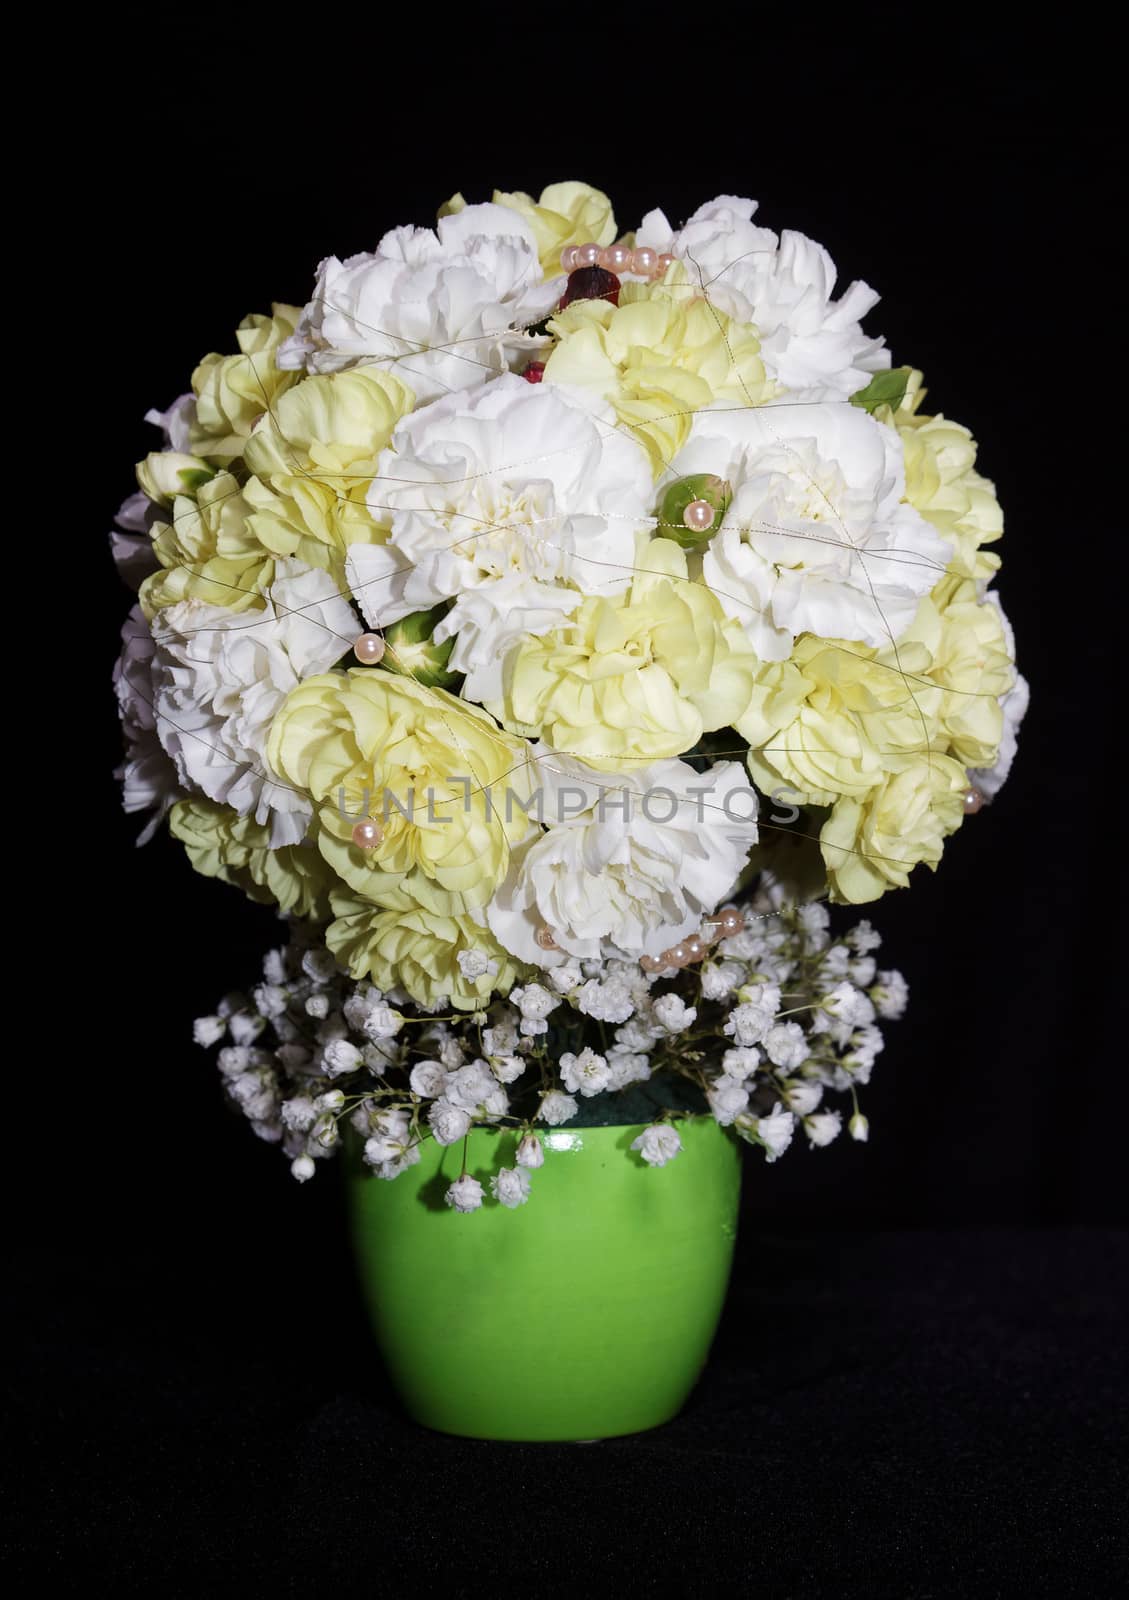 round festive bouquet of yellow carnations on a black background